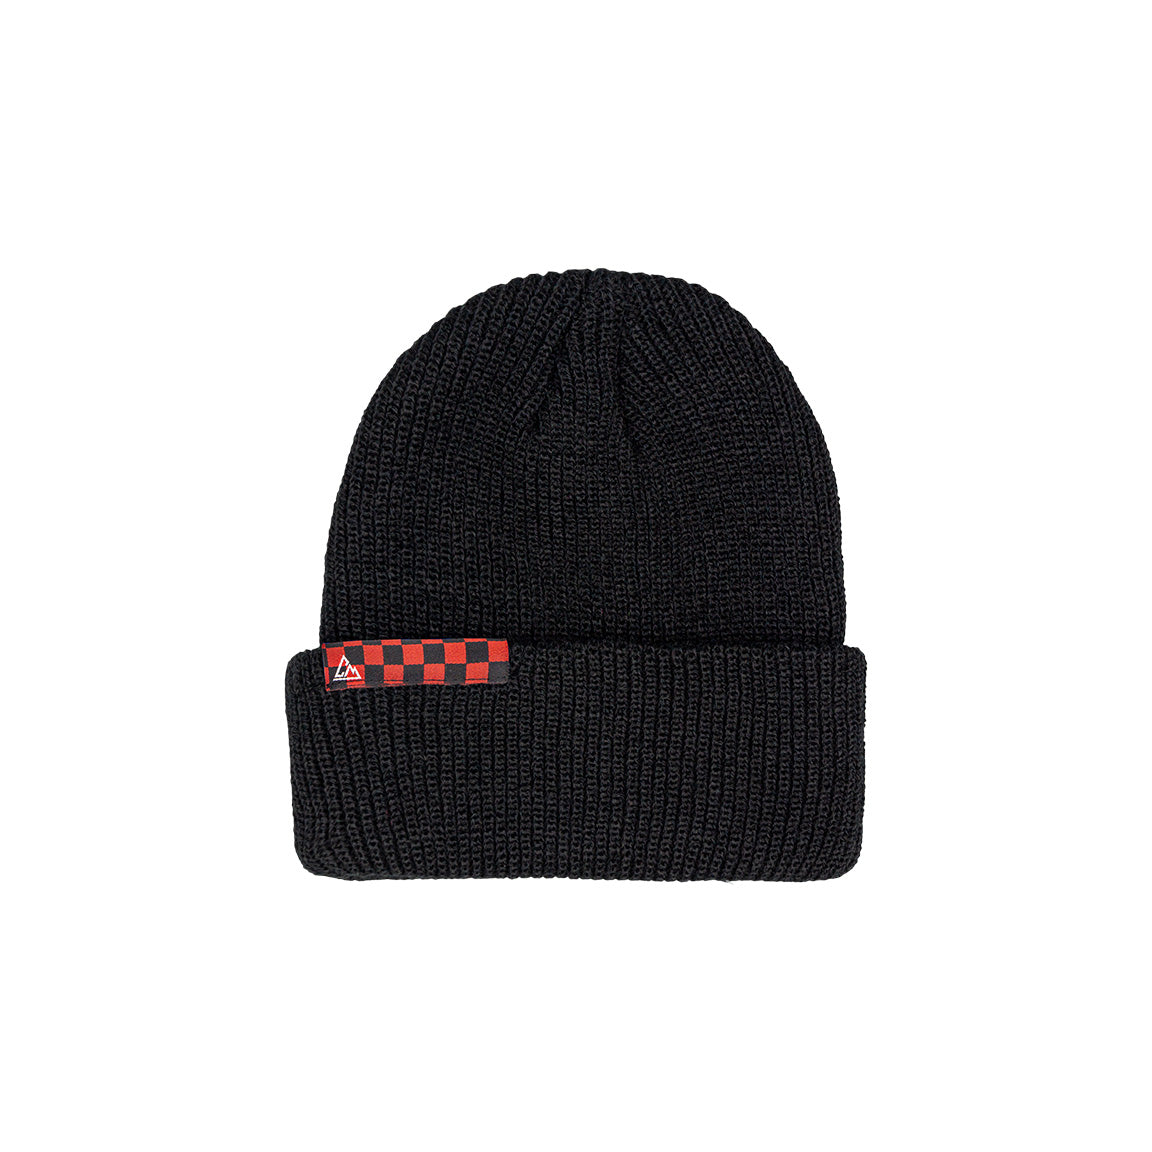 A black ribbed beanie is shown, sporting a red and black checkered band on the cuff, complemented by a small triangular logo tag.